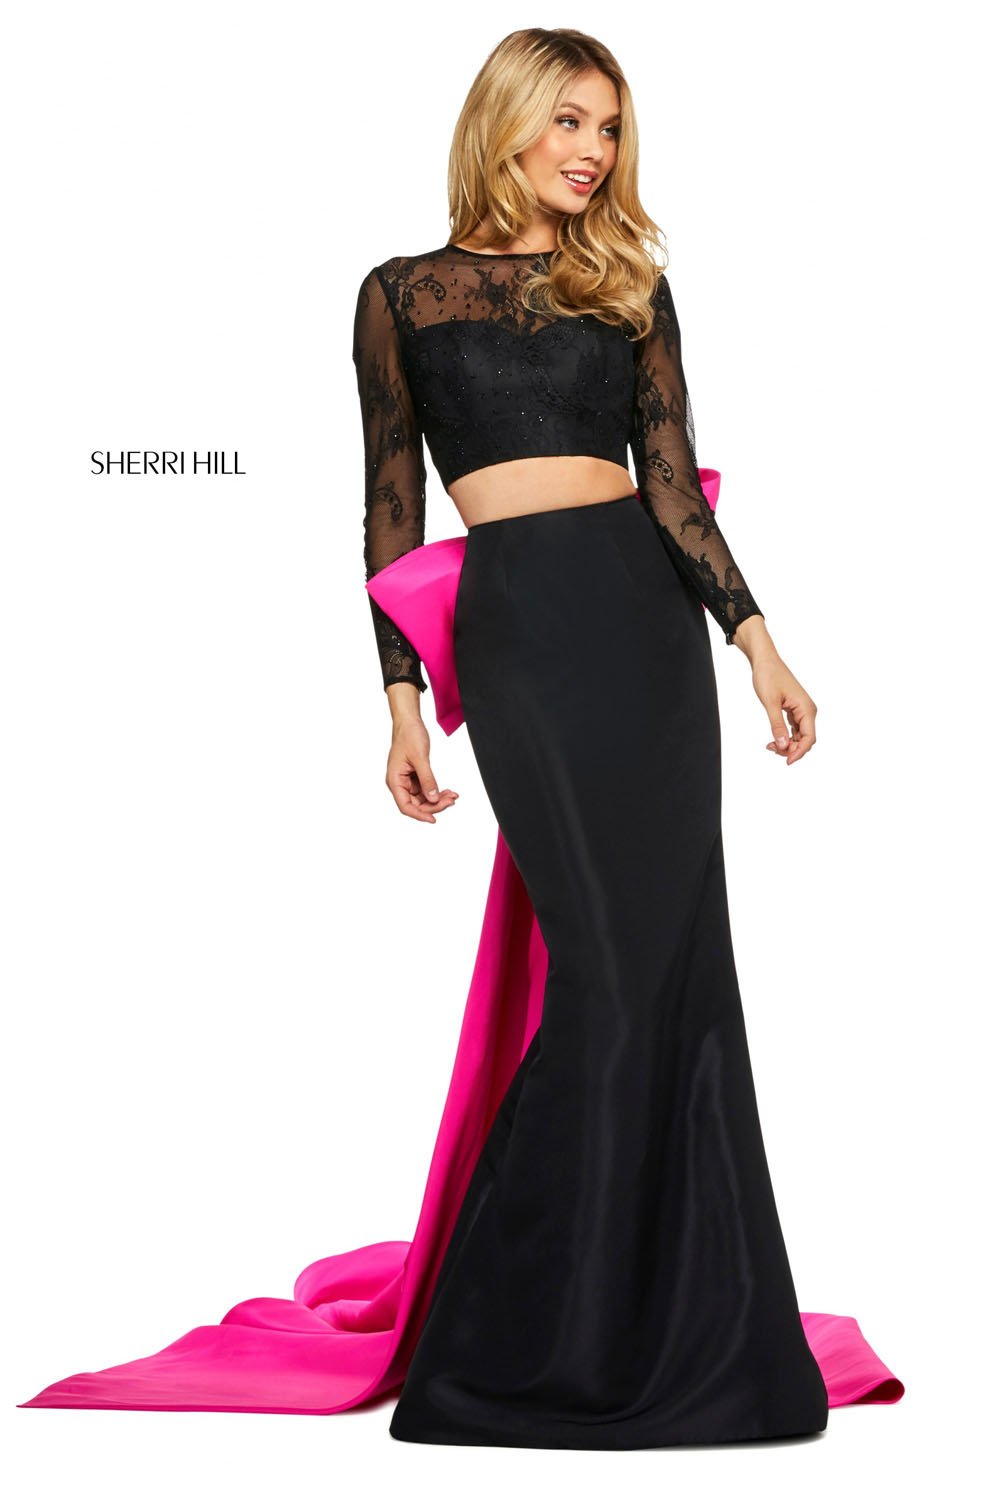 Sherri Hill 53463 dress images in these colors: Black Red, Black Fuchsia.